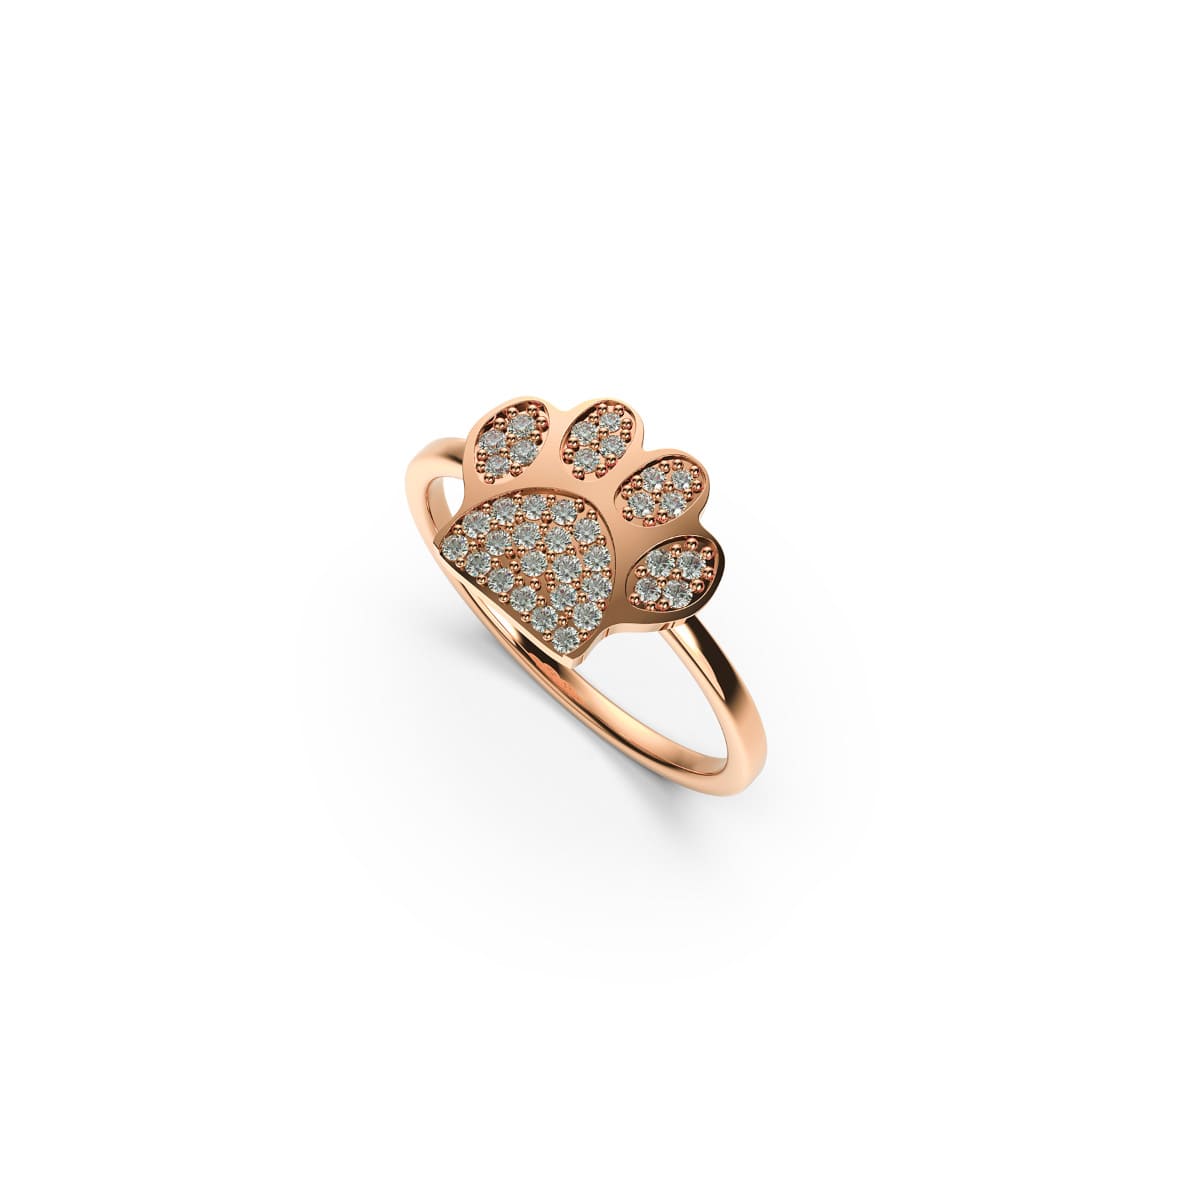 Paw | 18k Rose Gold Vermeil | .925 Sterling Silver | Cubic Zirconia Crystal Pup Print Ring